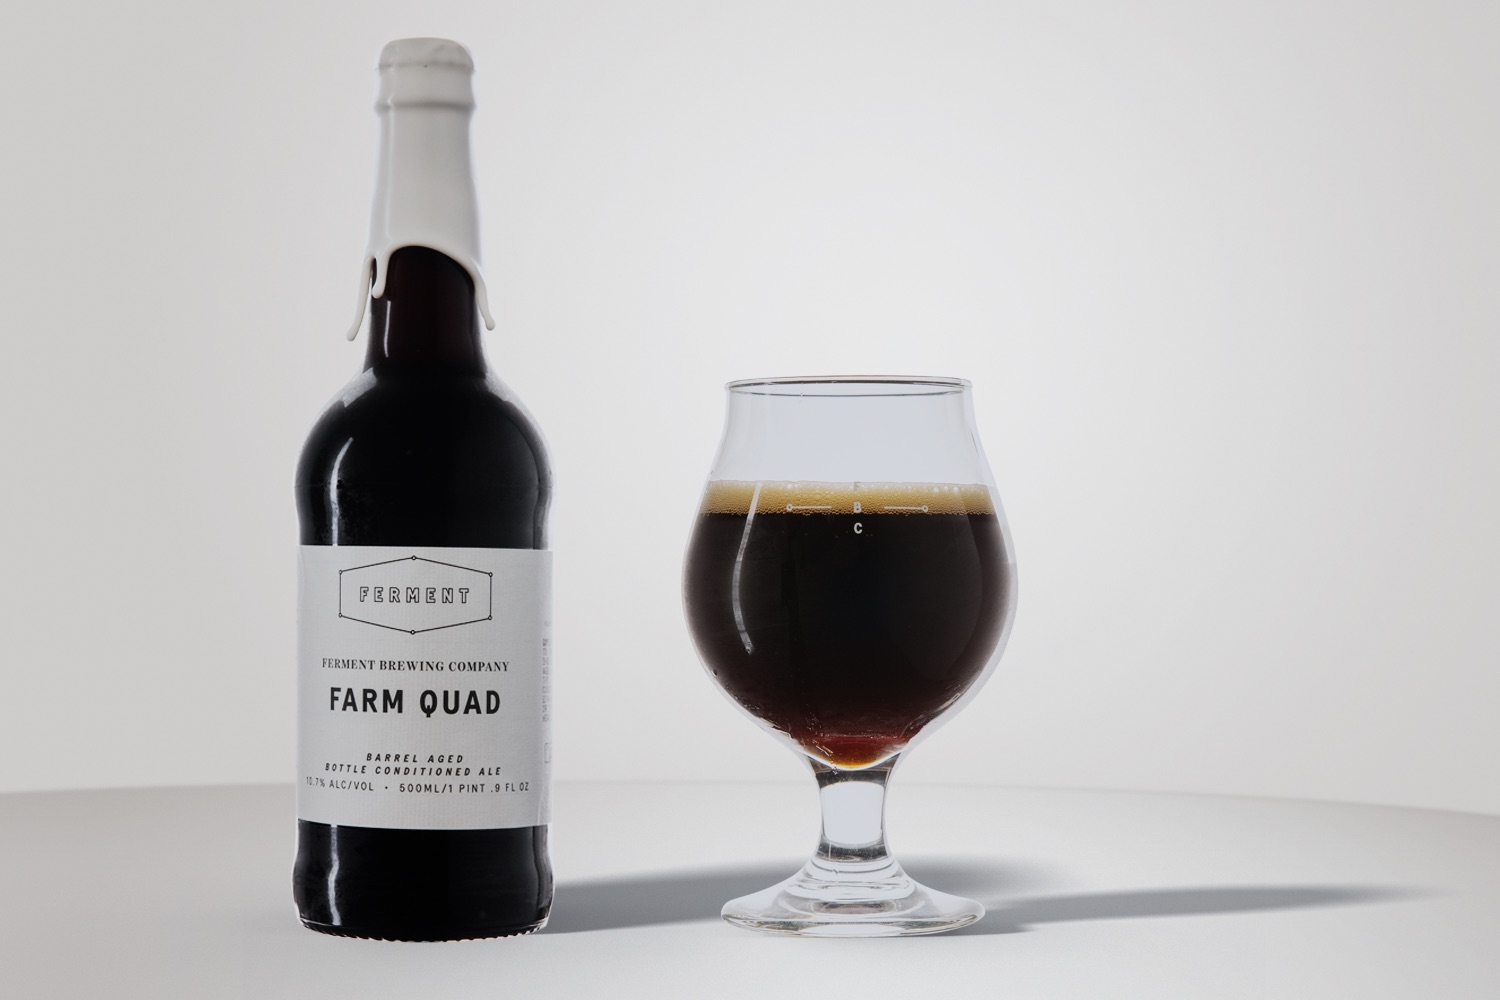 image of Farm Quad courtesy of Ferment Brewing Co.